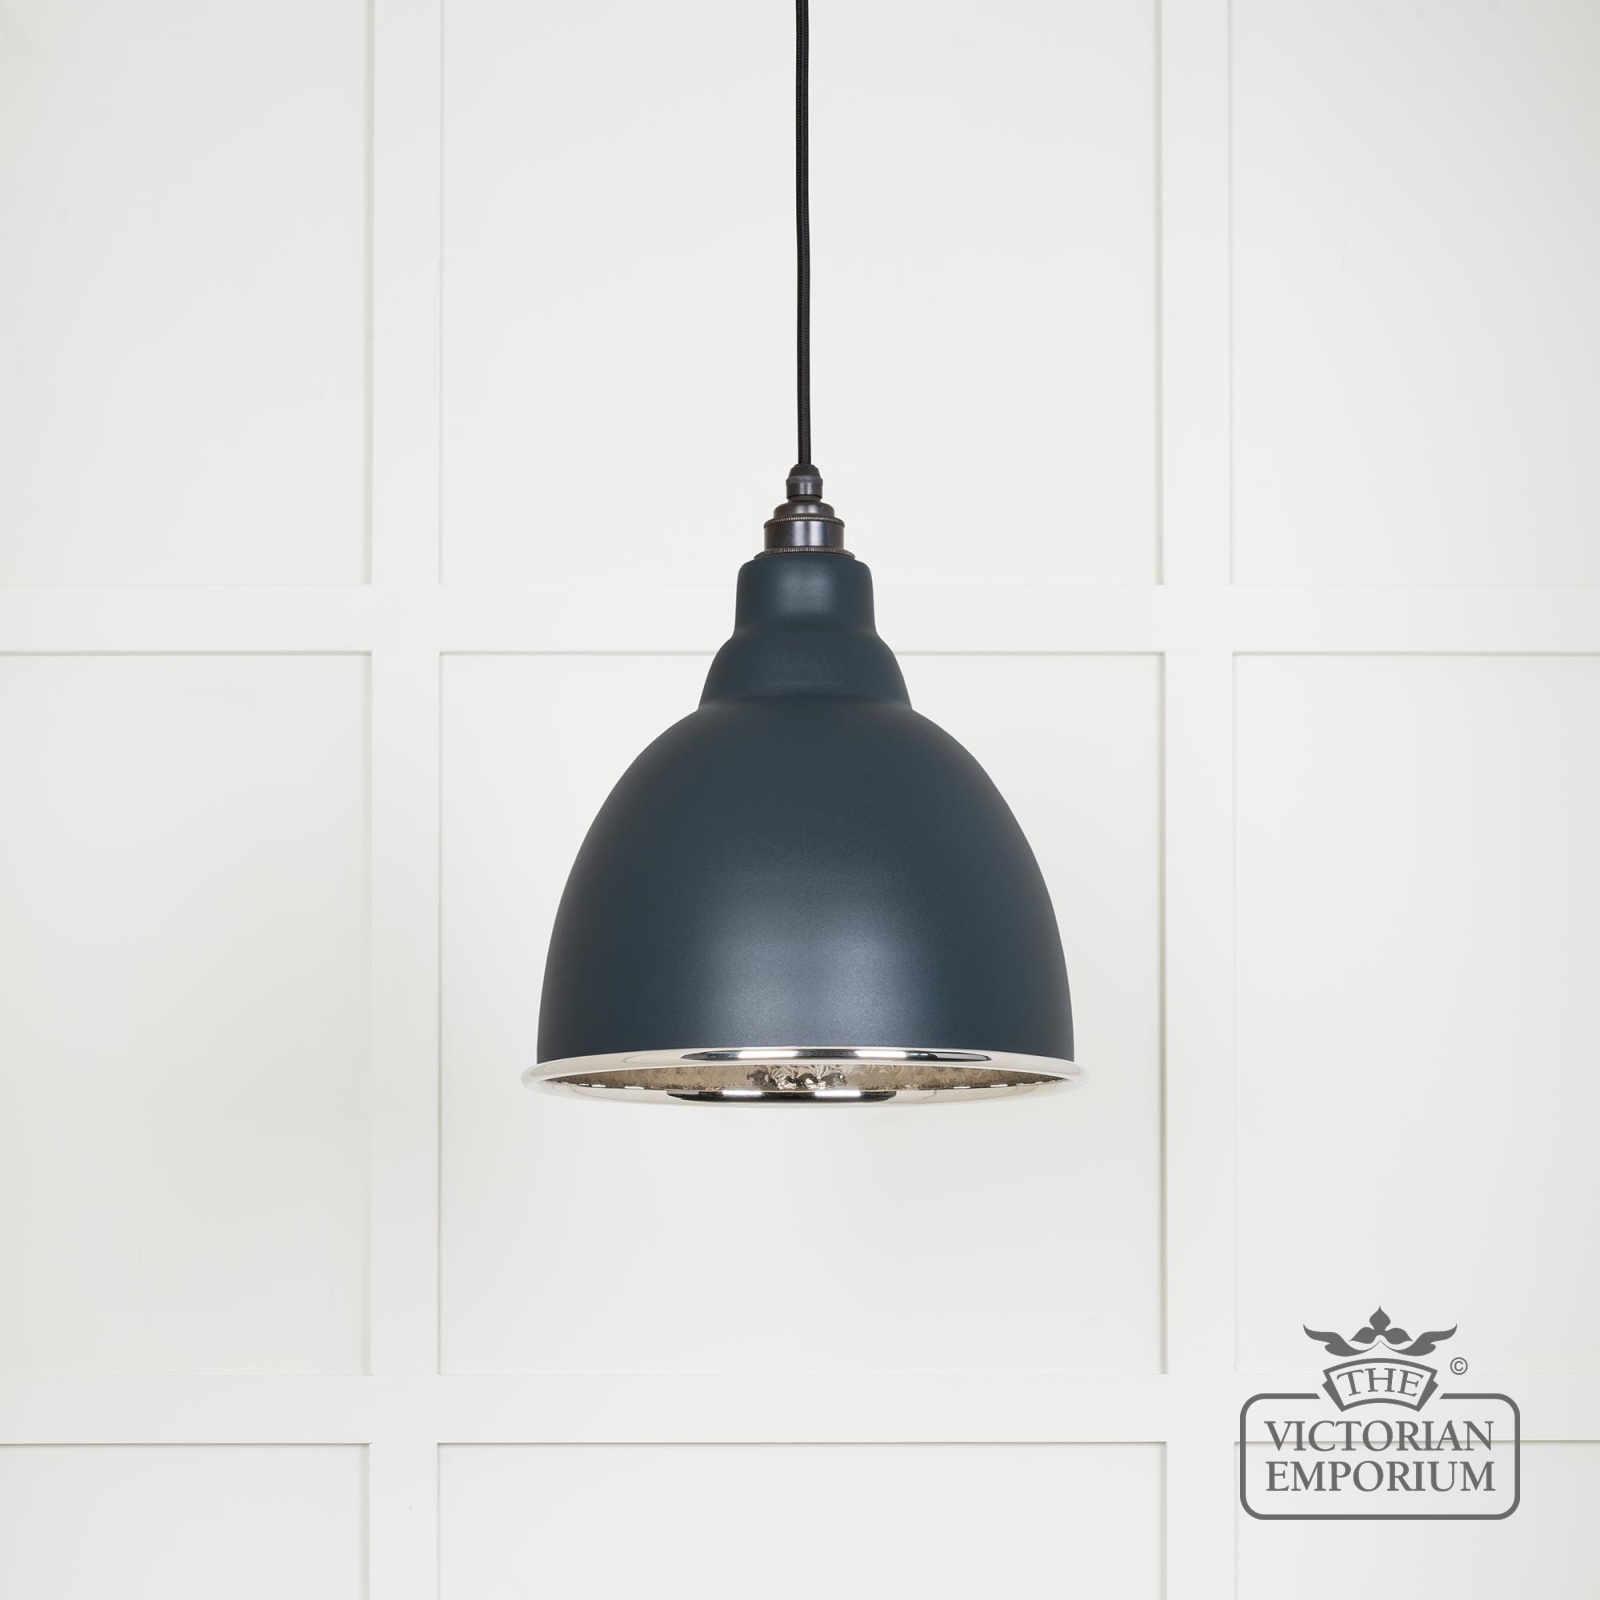 Brindle pendant light in Soot with hammered nickel interior